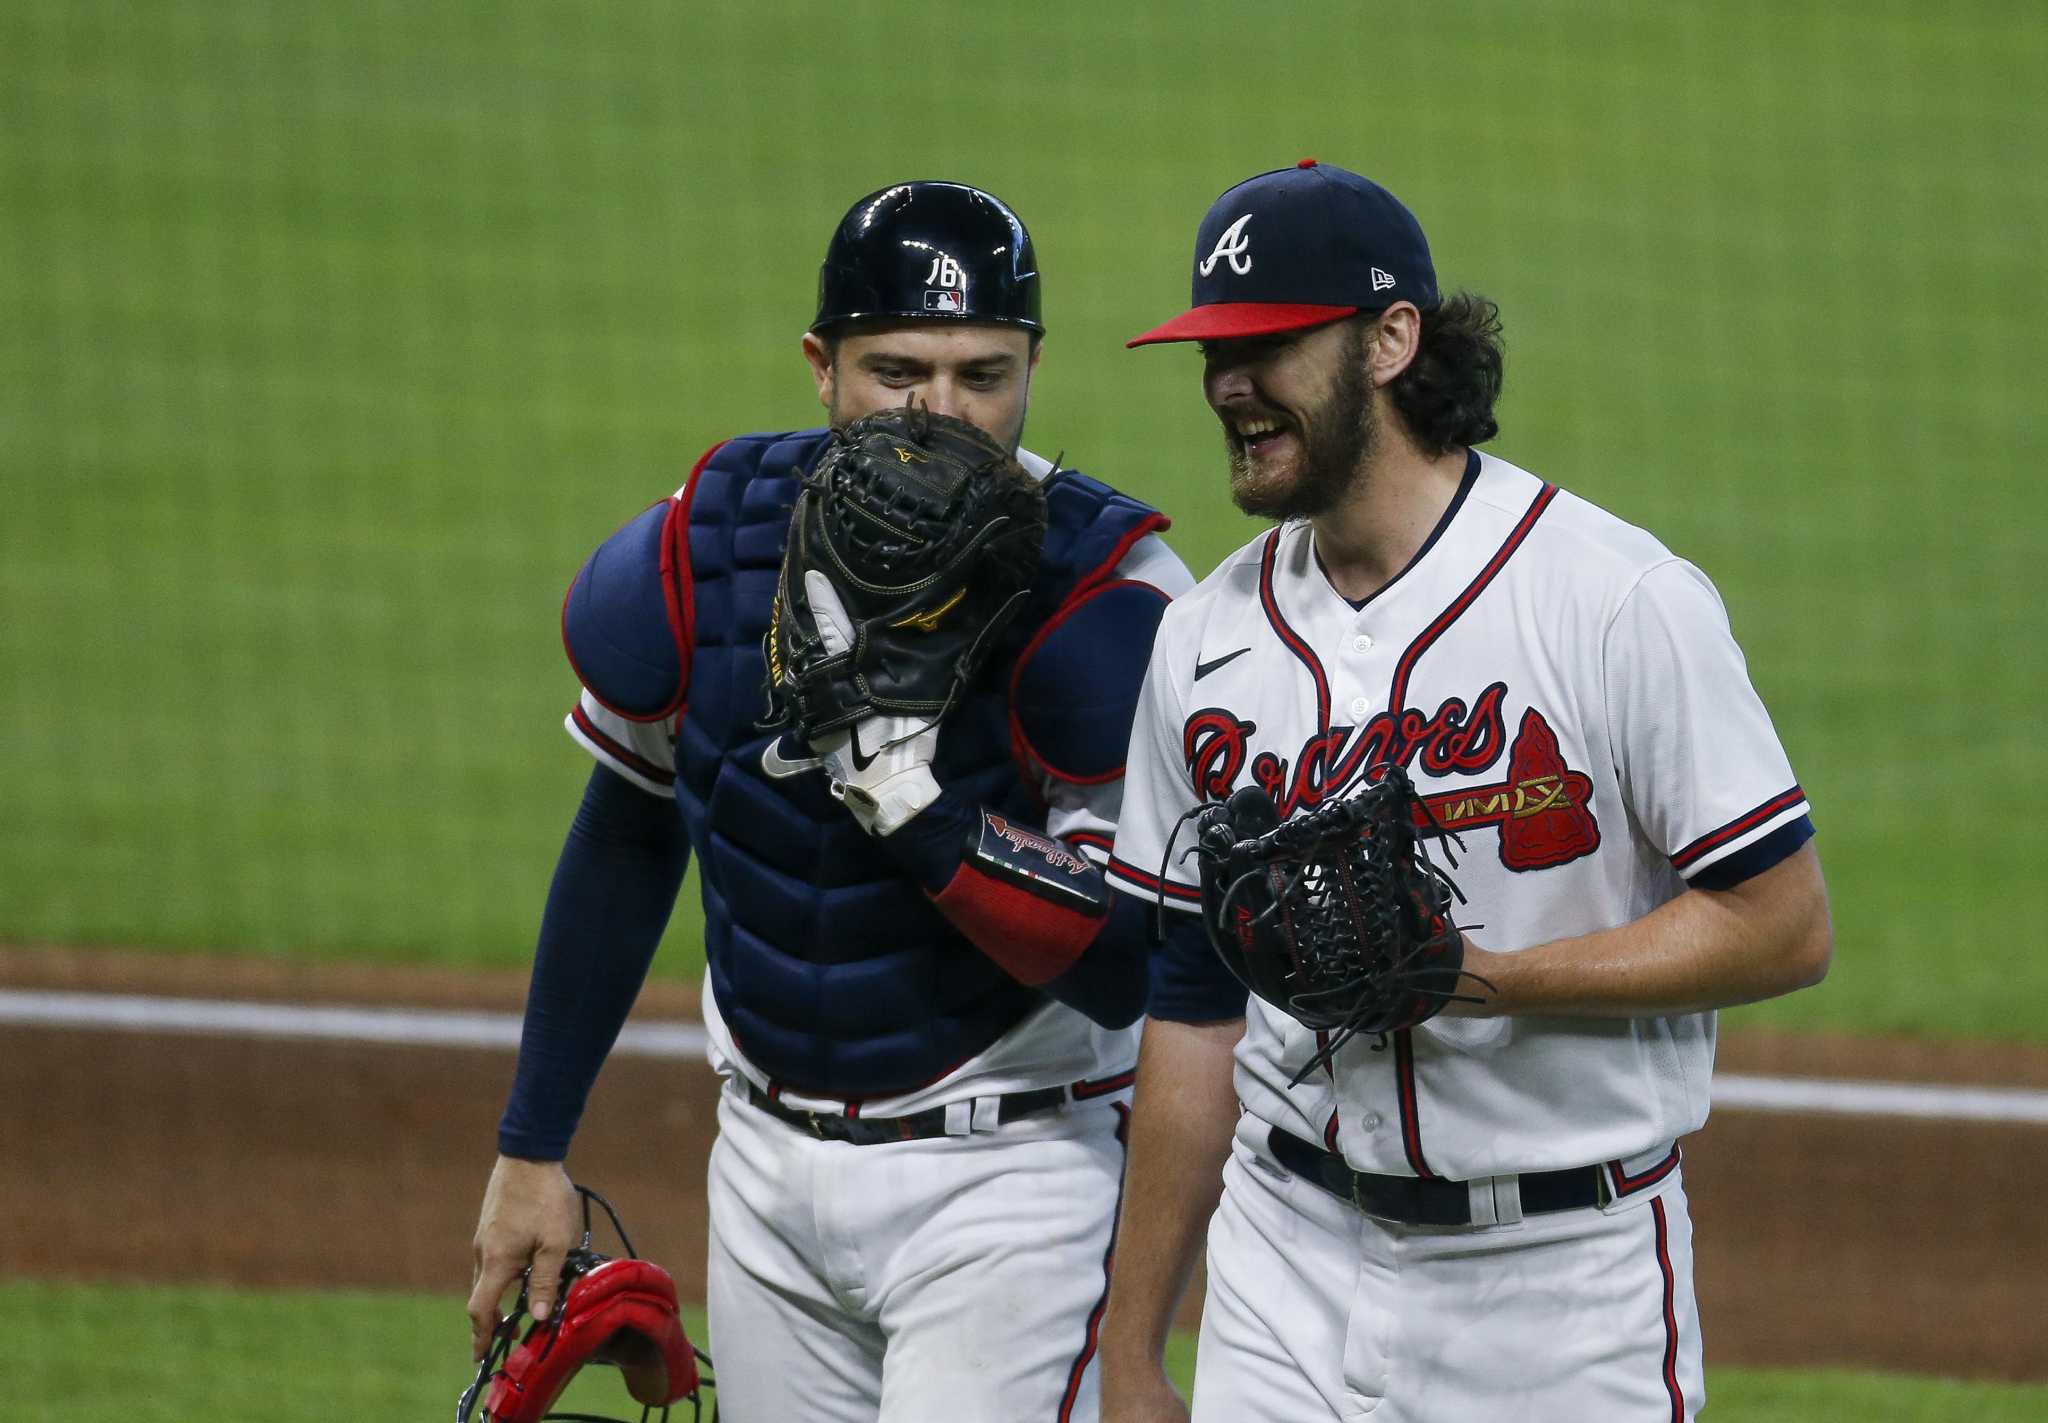 Fresh-faced Braves starter familiar with Astros' lineup — from a